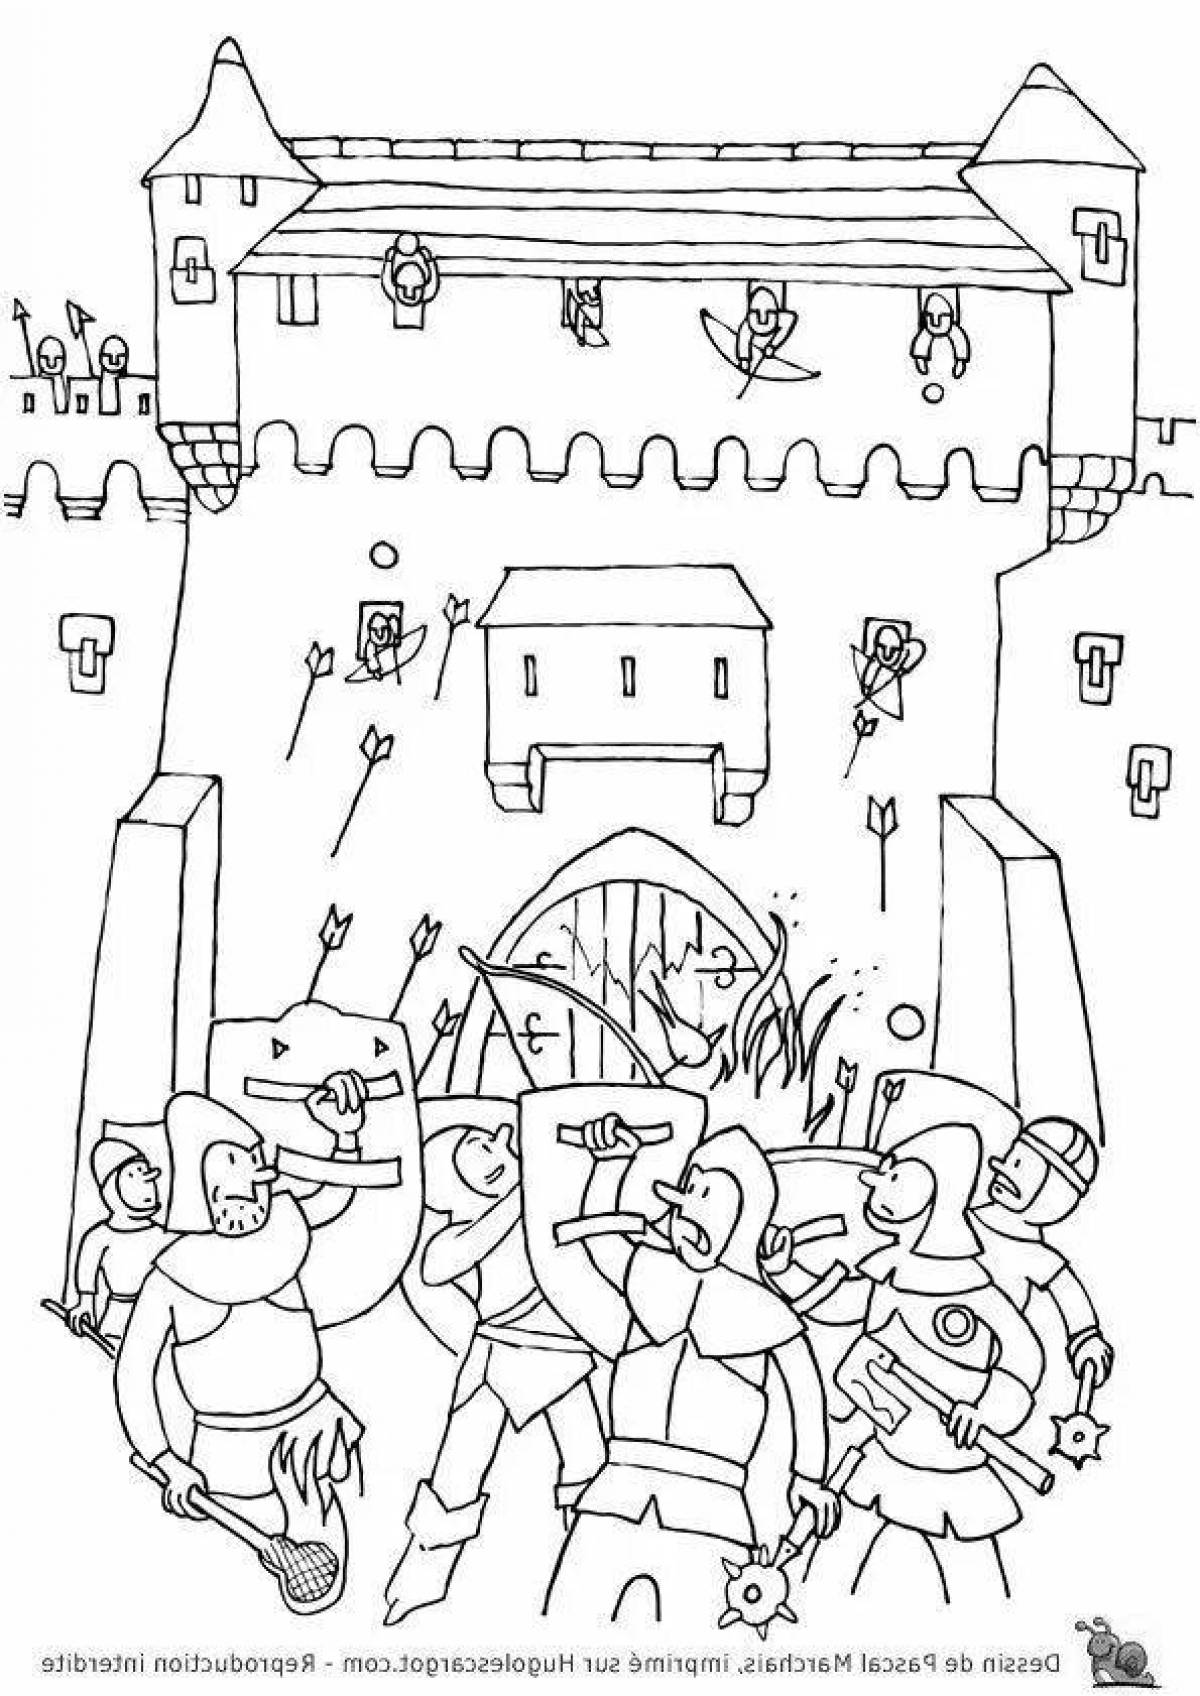 Coloring book royal knight's castle